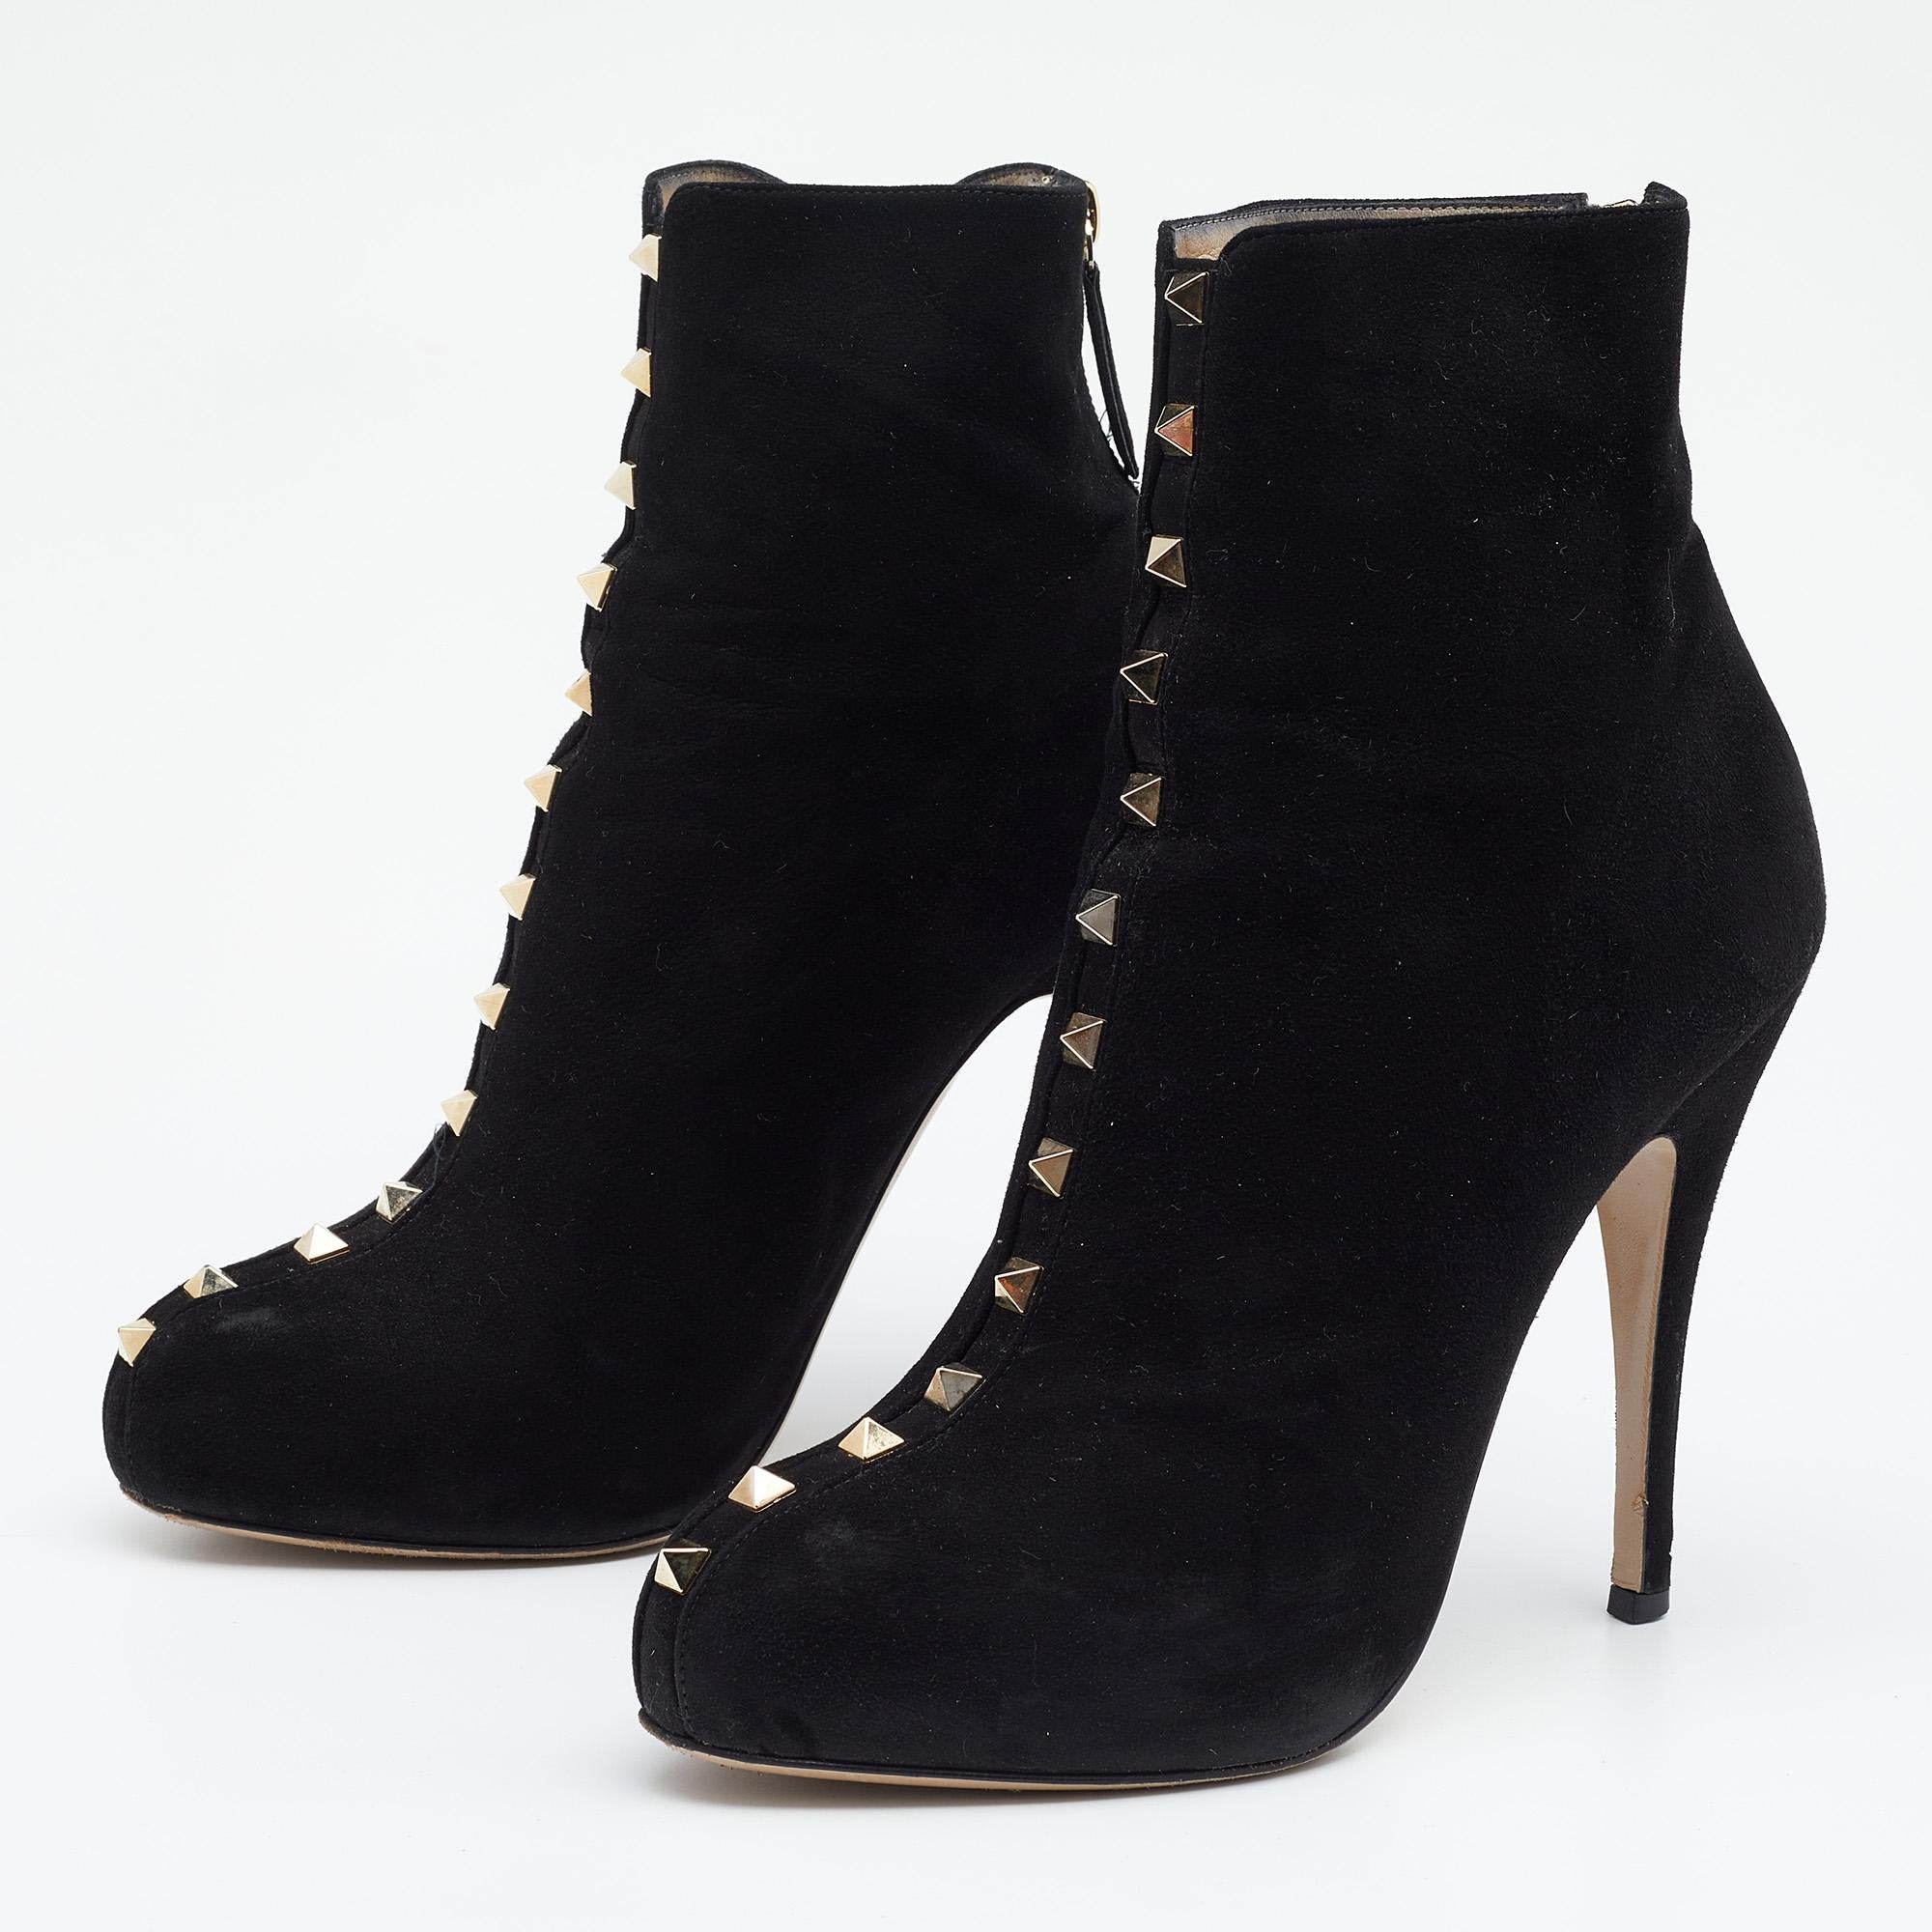 Women's Valentino Black Suede Rockstud Ankle Length Boots Size 38